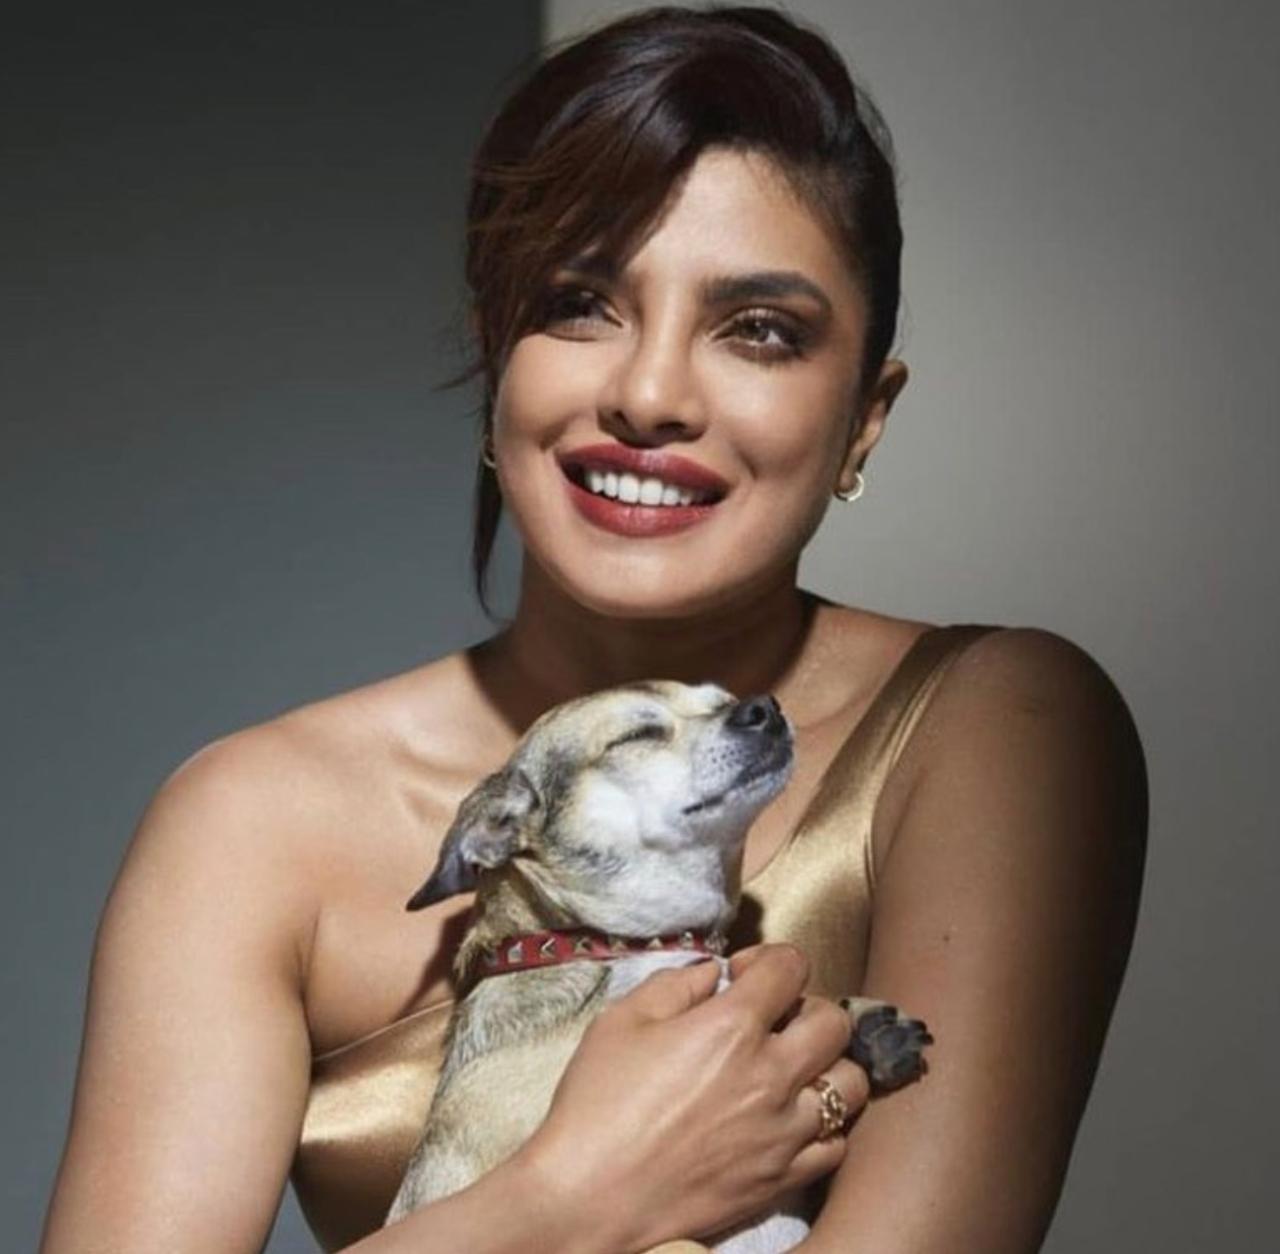 Priyanka and Nick Jonas are devoted pet parents to three adorable dogs: Diana, Panda, and Gino. The couple's deep affection for their furry companions is evident in the delightful snapshots they frequently post on their Instagram feed. Diana, the sweet canine in this picture, even has her own Instagram account and is full of personality. 